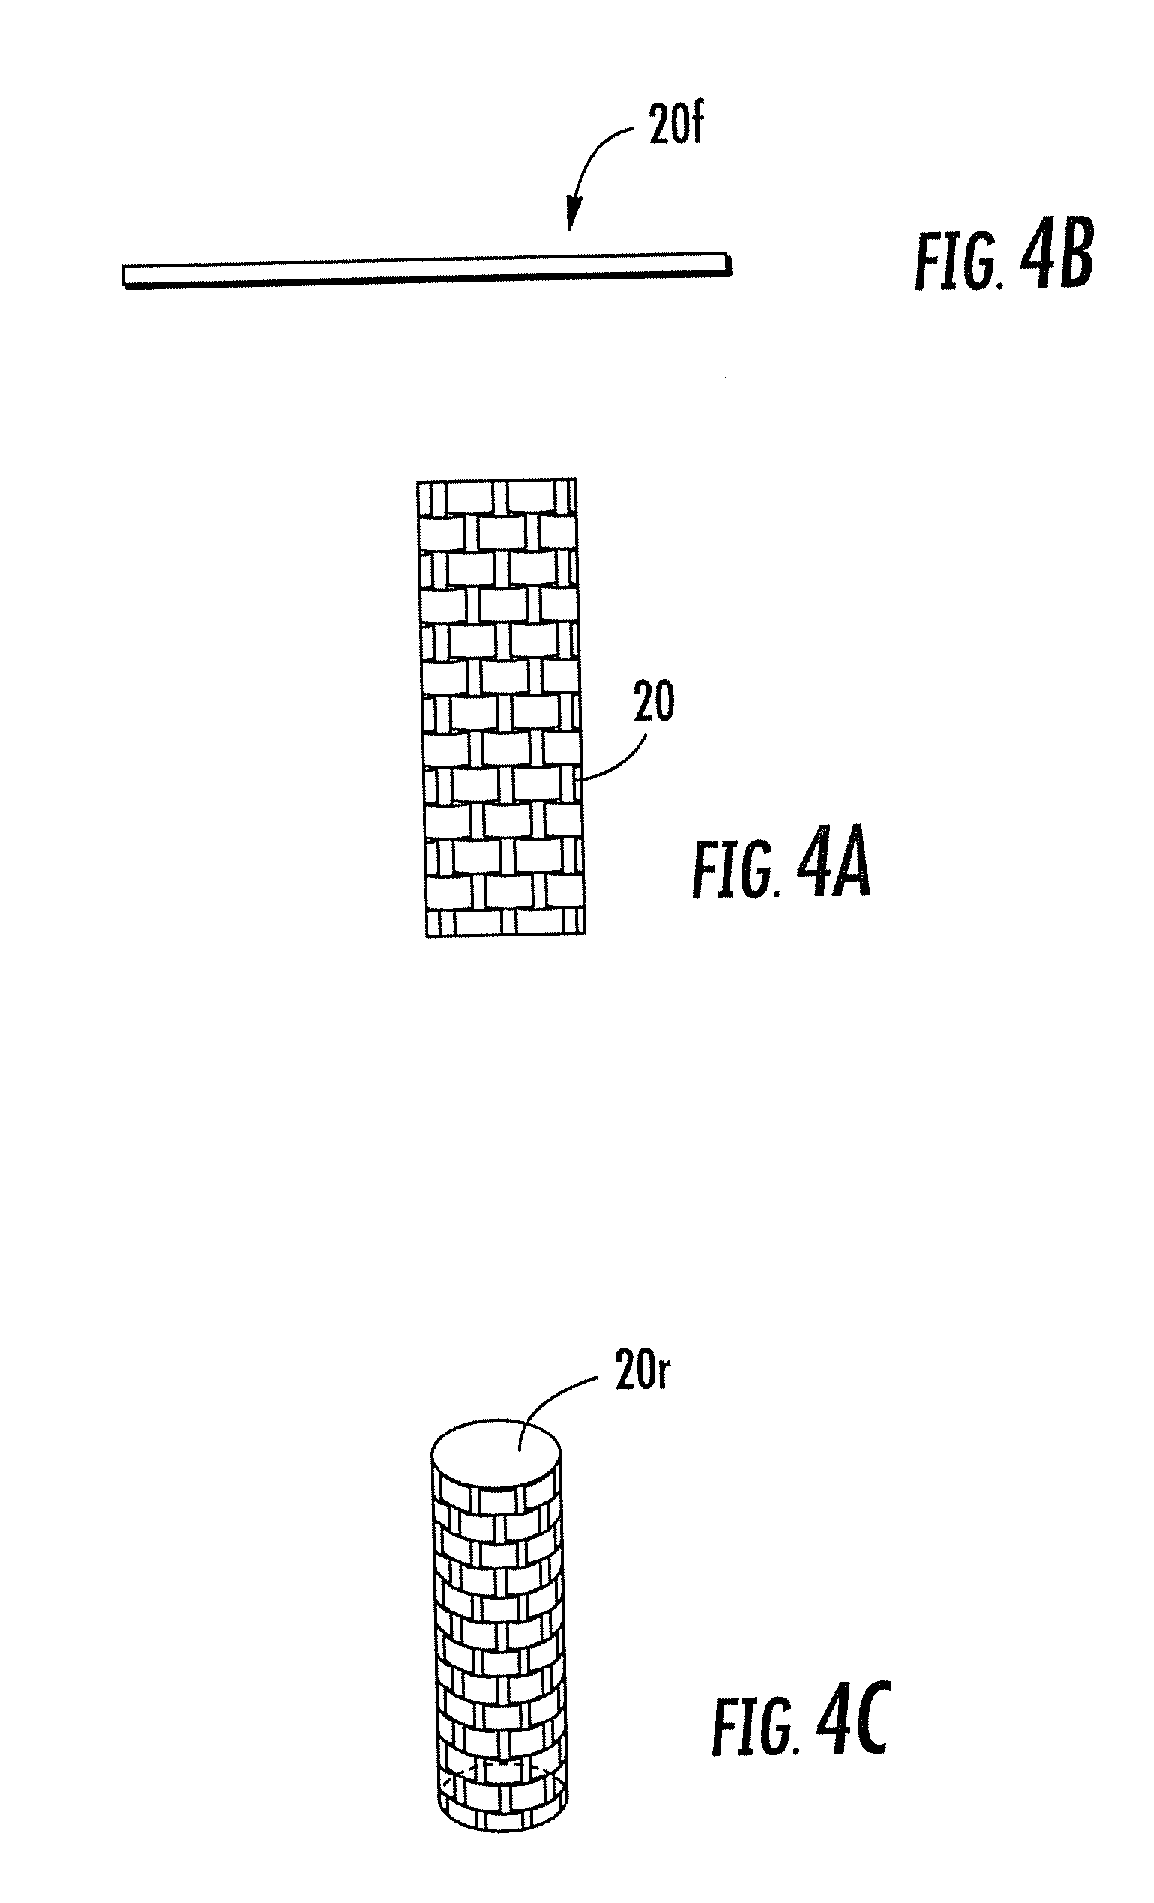 Woven and/or braided fiber implants and methods of making same